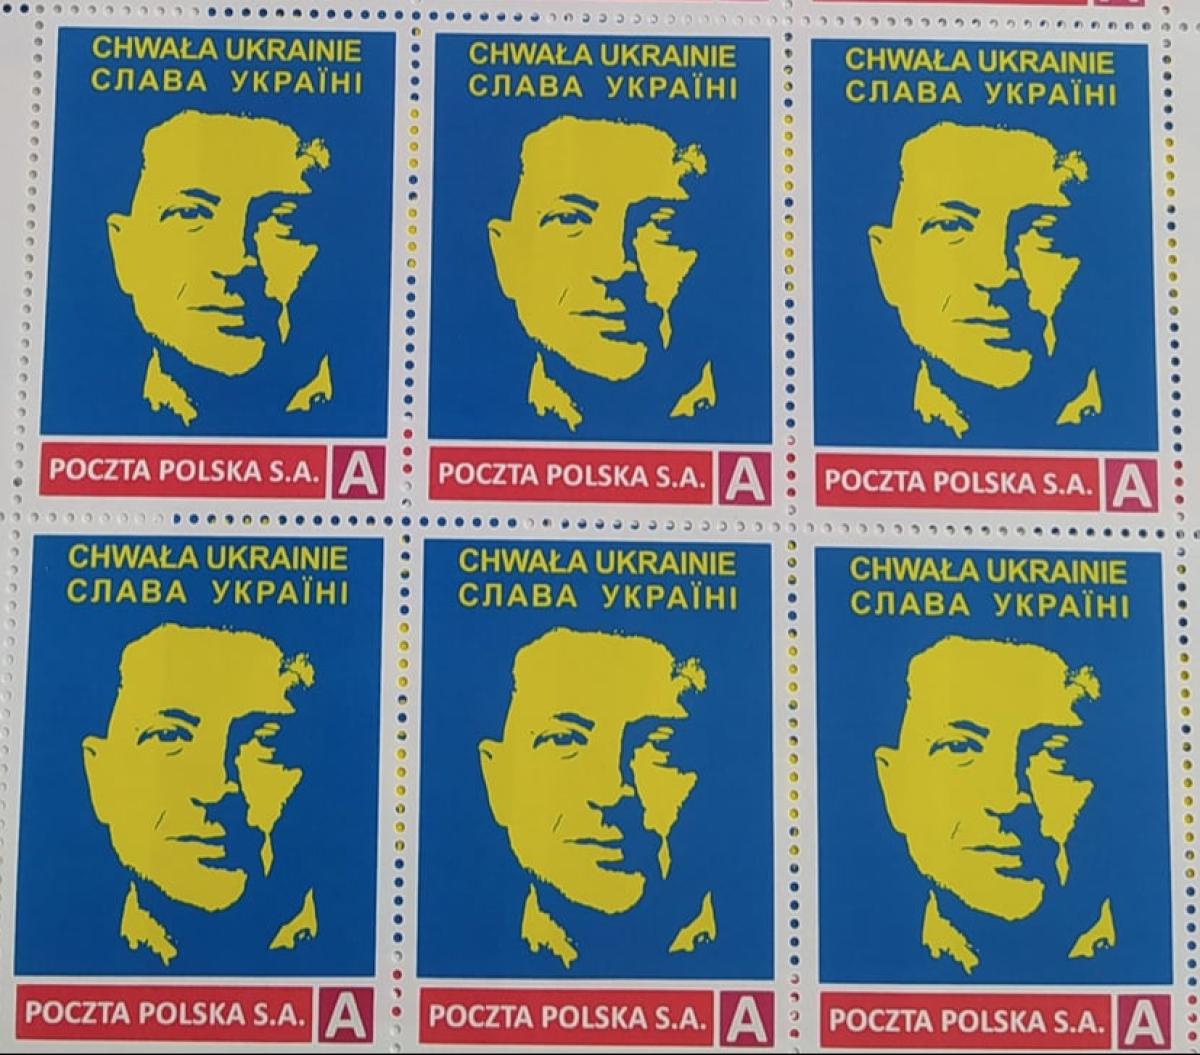 Poland issues the world's first postage stamp with a portrait of Zelensky